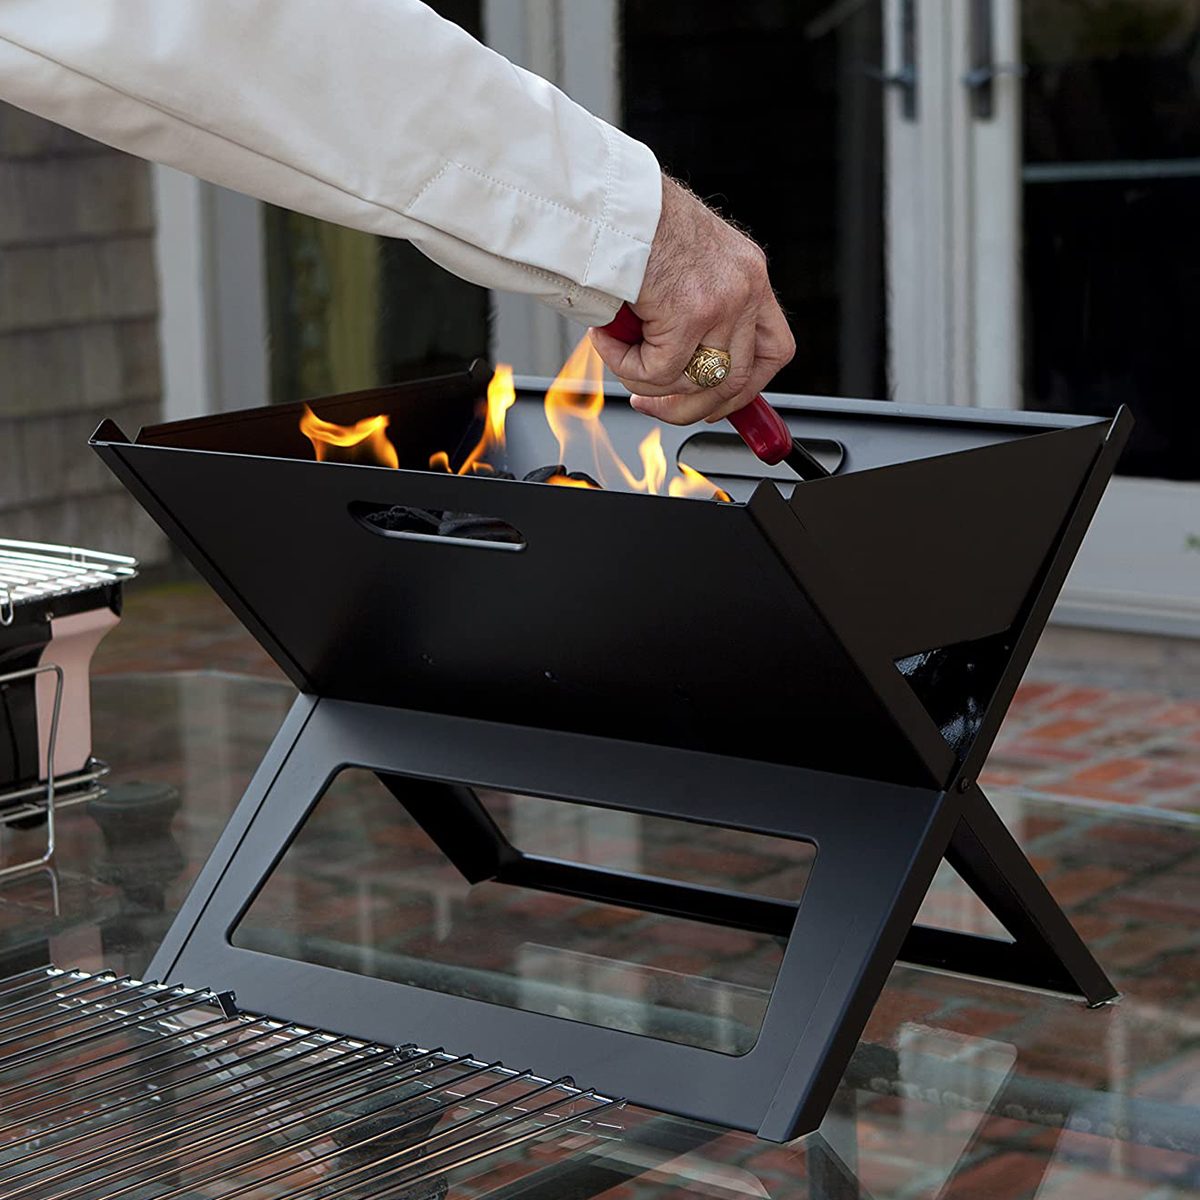 The 8 Best Charcoal Grills for Your Next BBQ